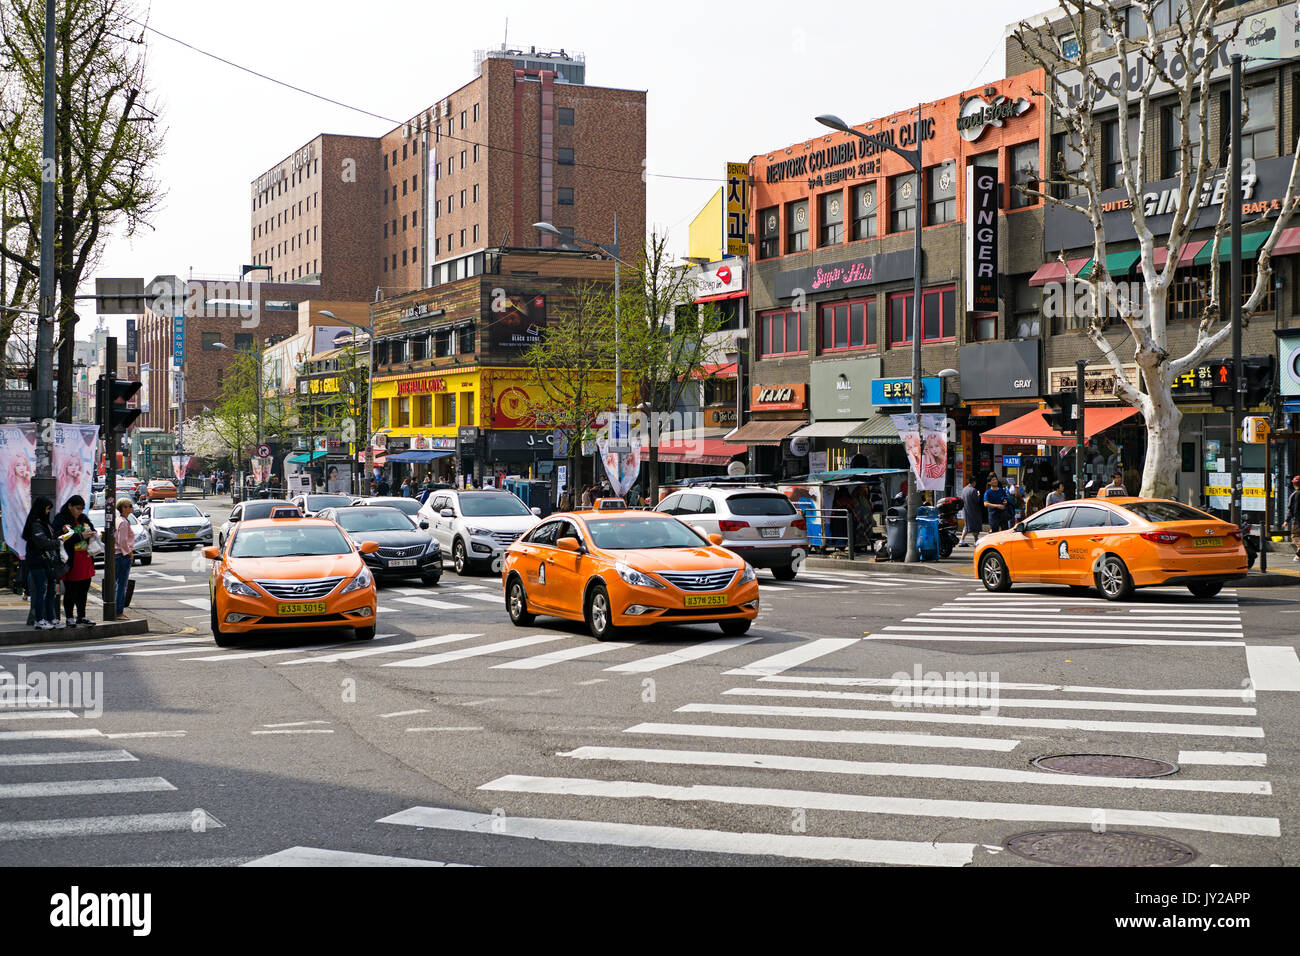 Seoul, Korea - April 08, 2017: Traffic street view with cars and tax in Itaewon town in Seoul. Itaewon is widely known as one of the most ethnically d Stock Photo